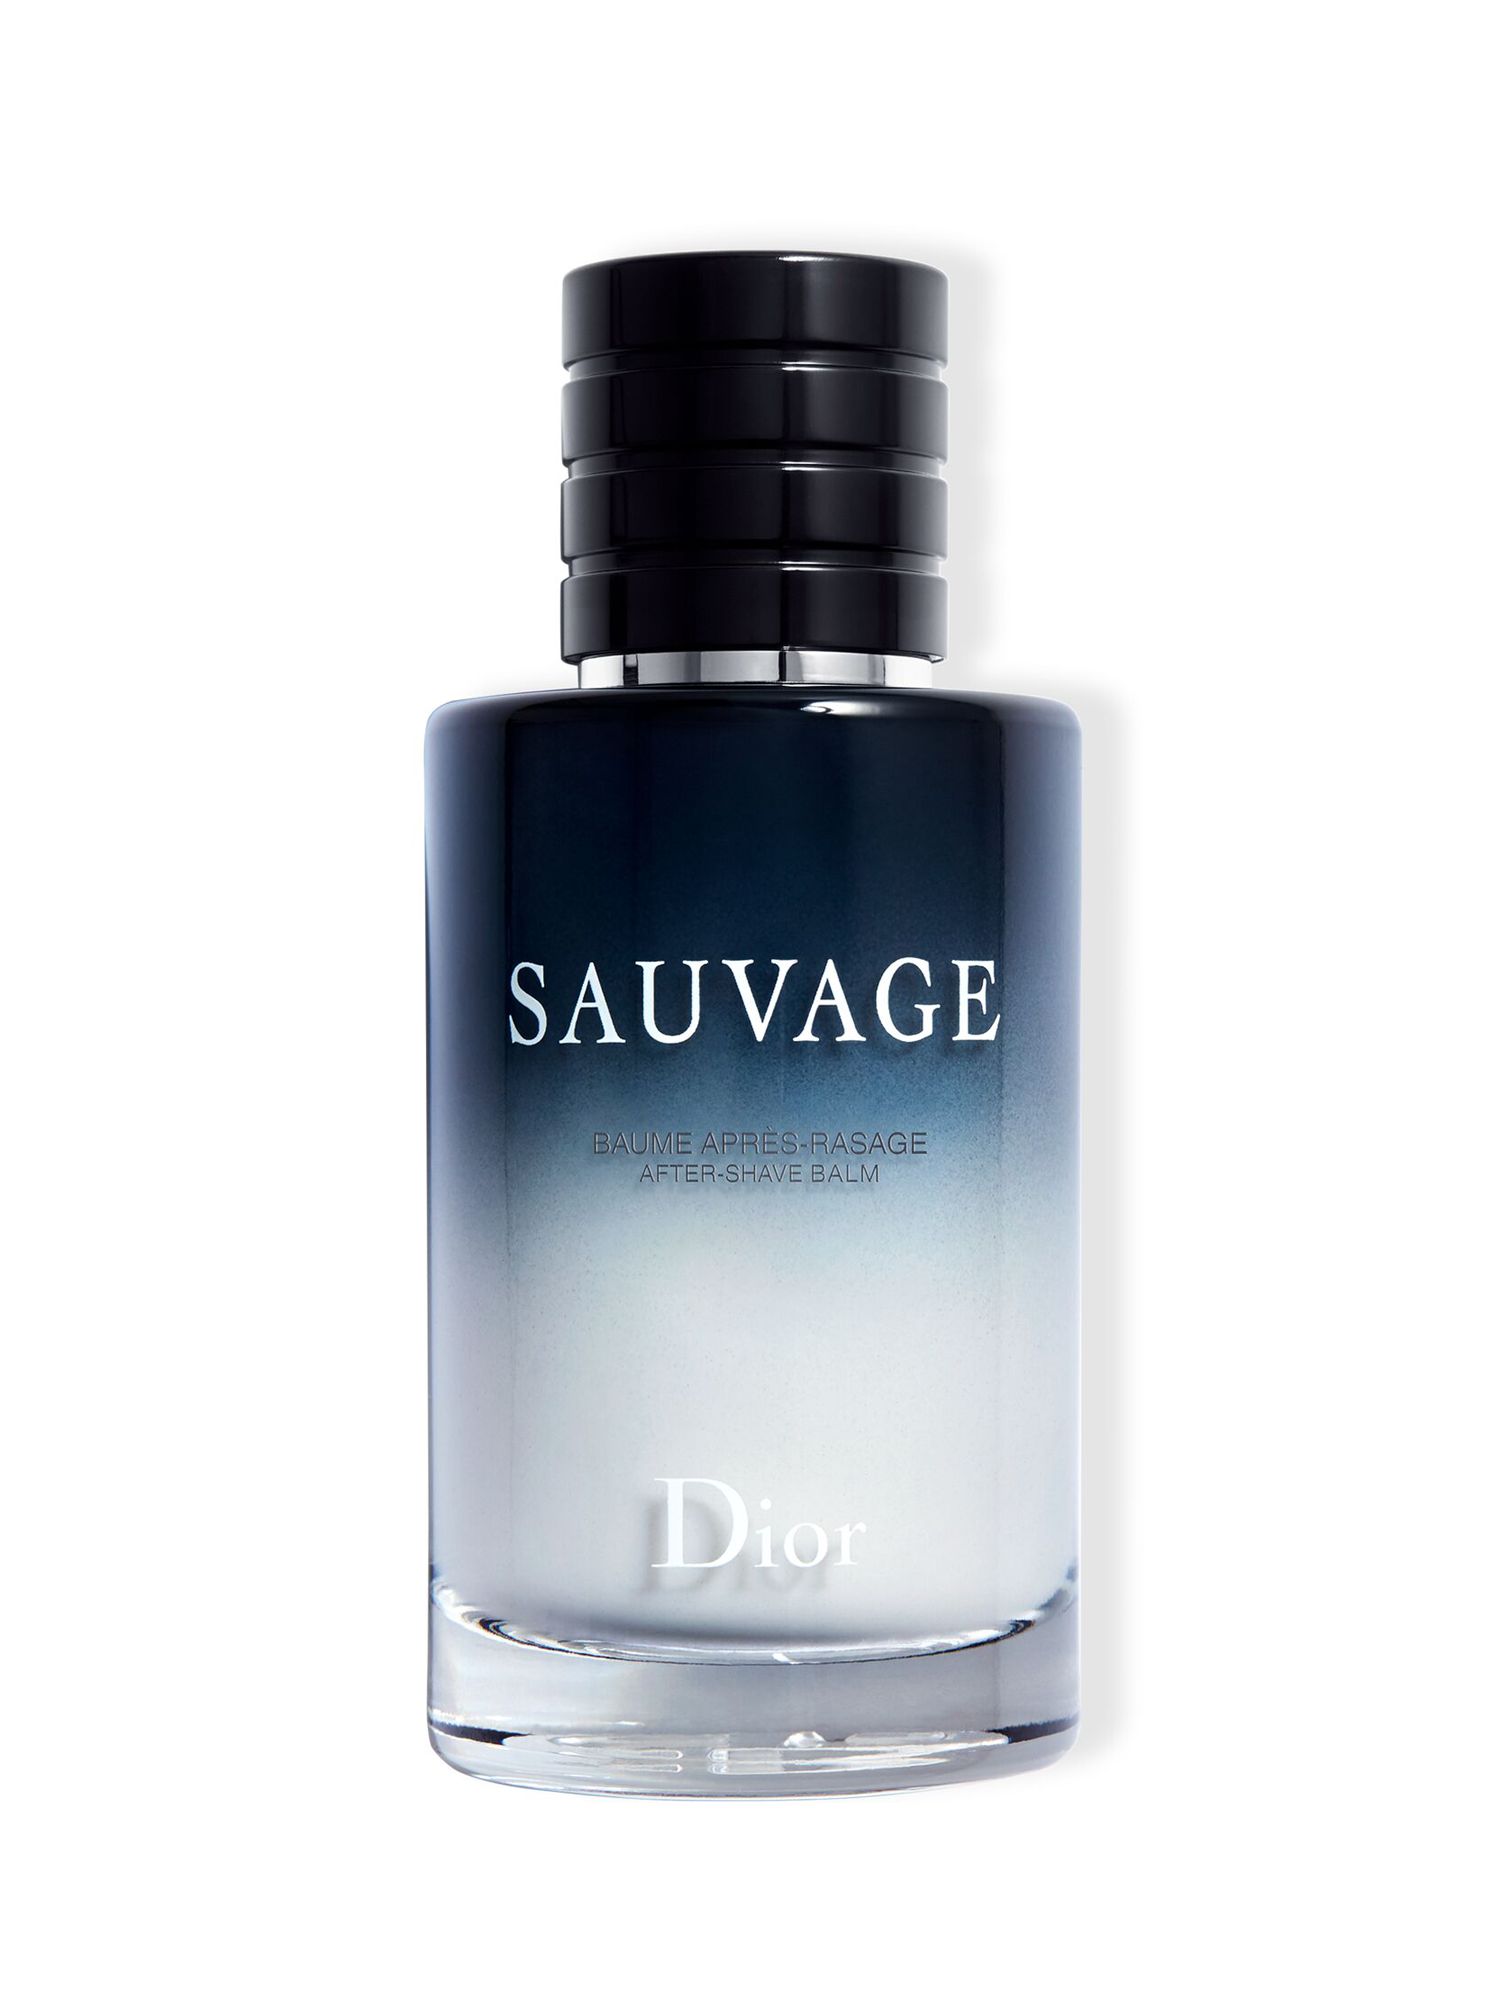 Dior Sauvage After Shave Balm, 100ml at John Lewis & Partners